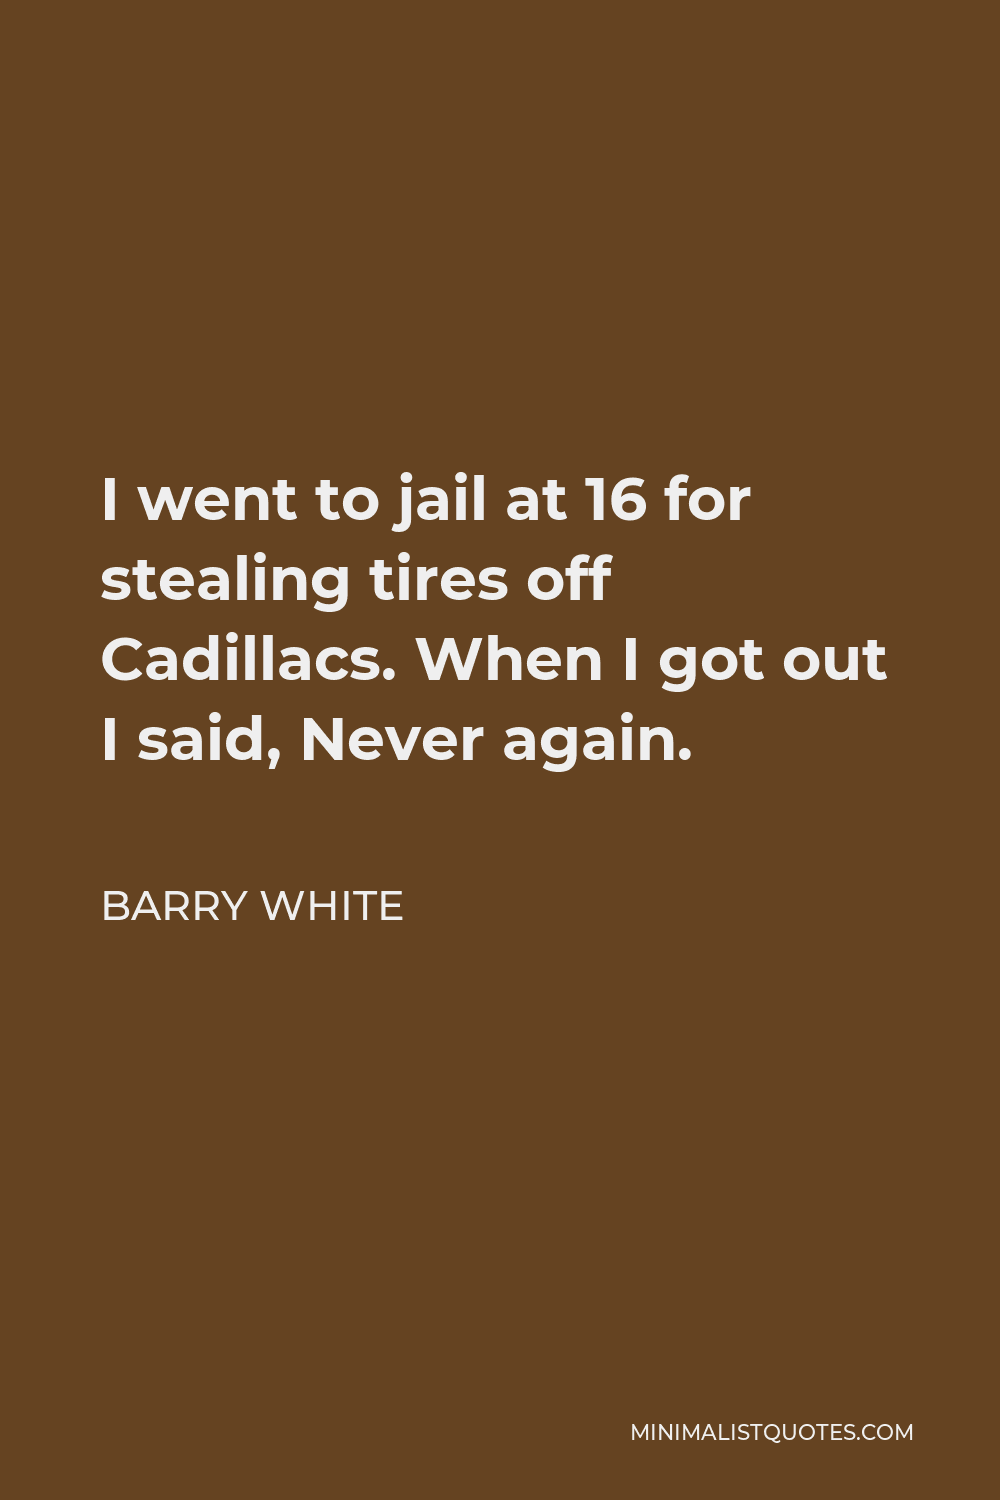 Barry White Quote - I went to jail at 16 for stealing tires off Cadillacs. When I got out I said, Never again.